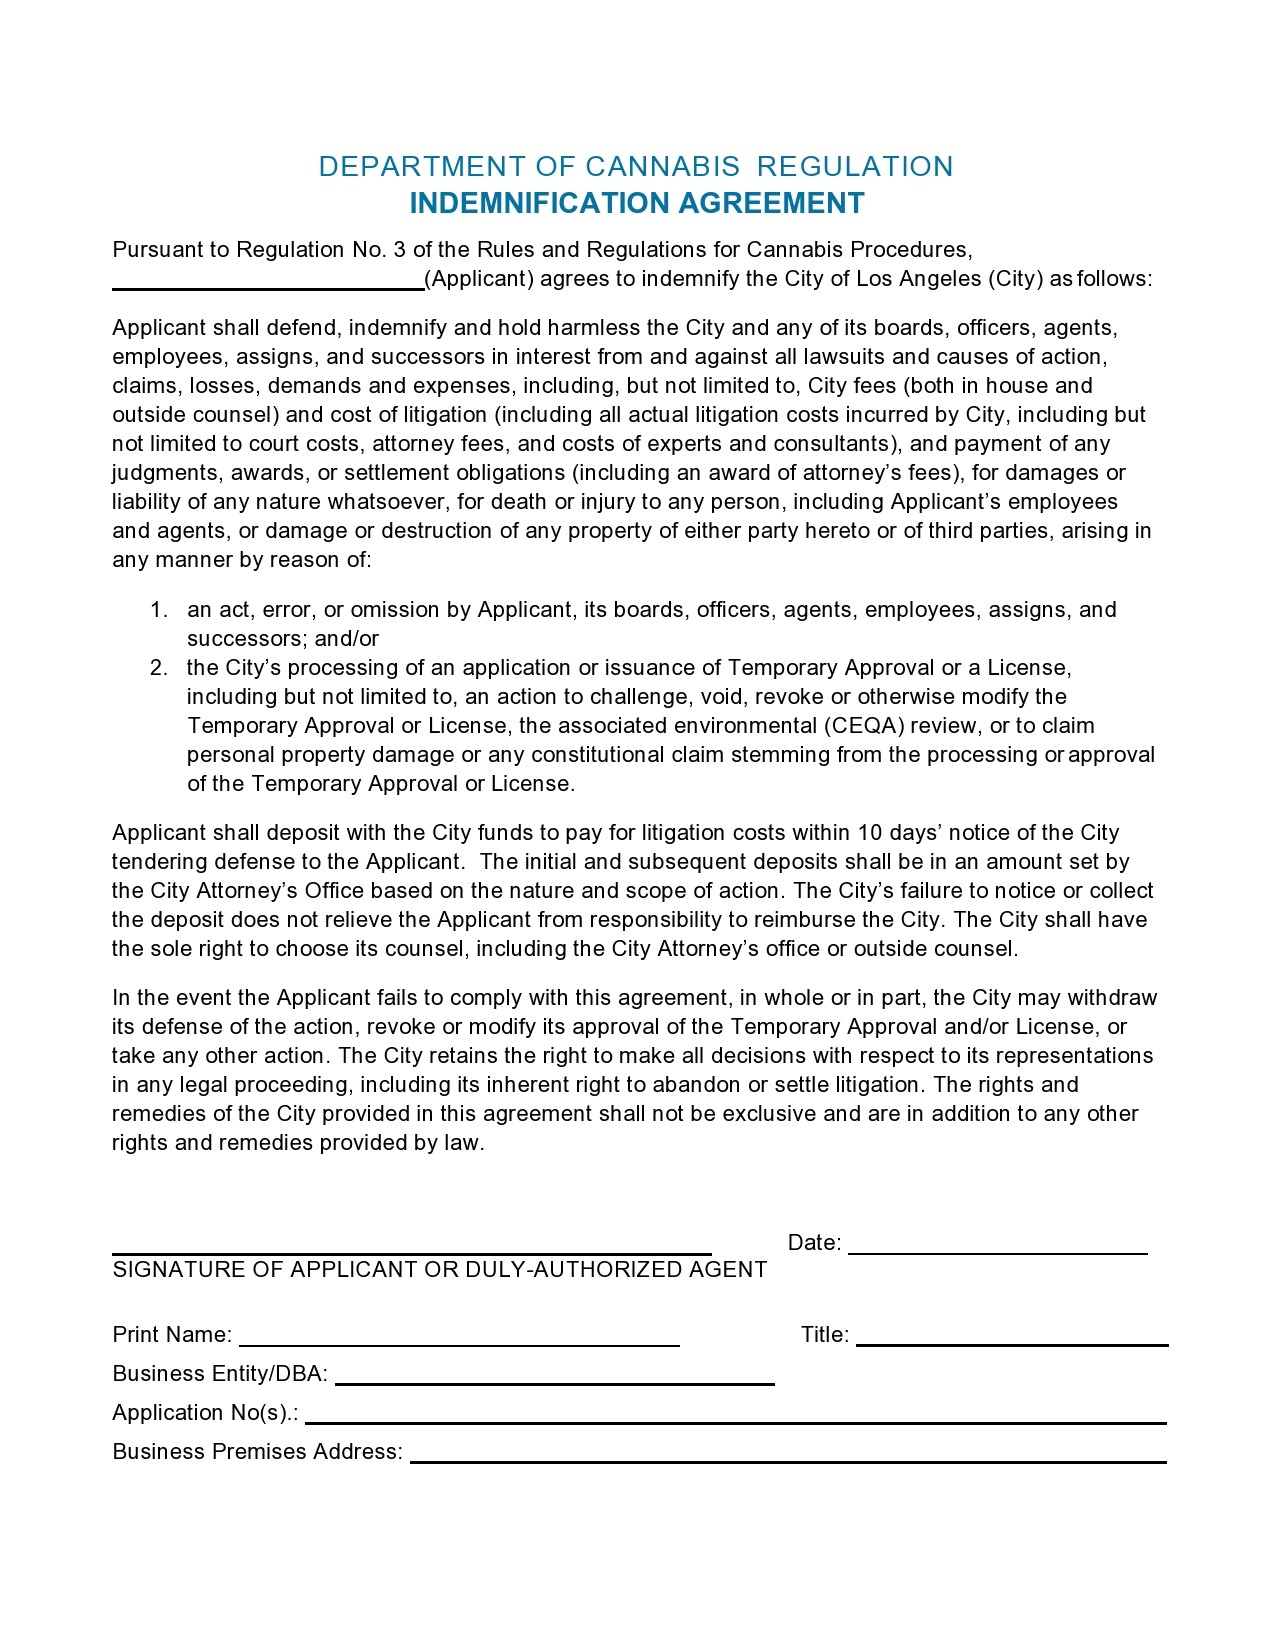 Free indemnification agreement 09